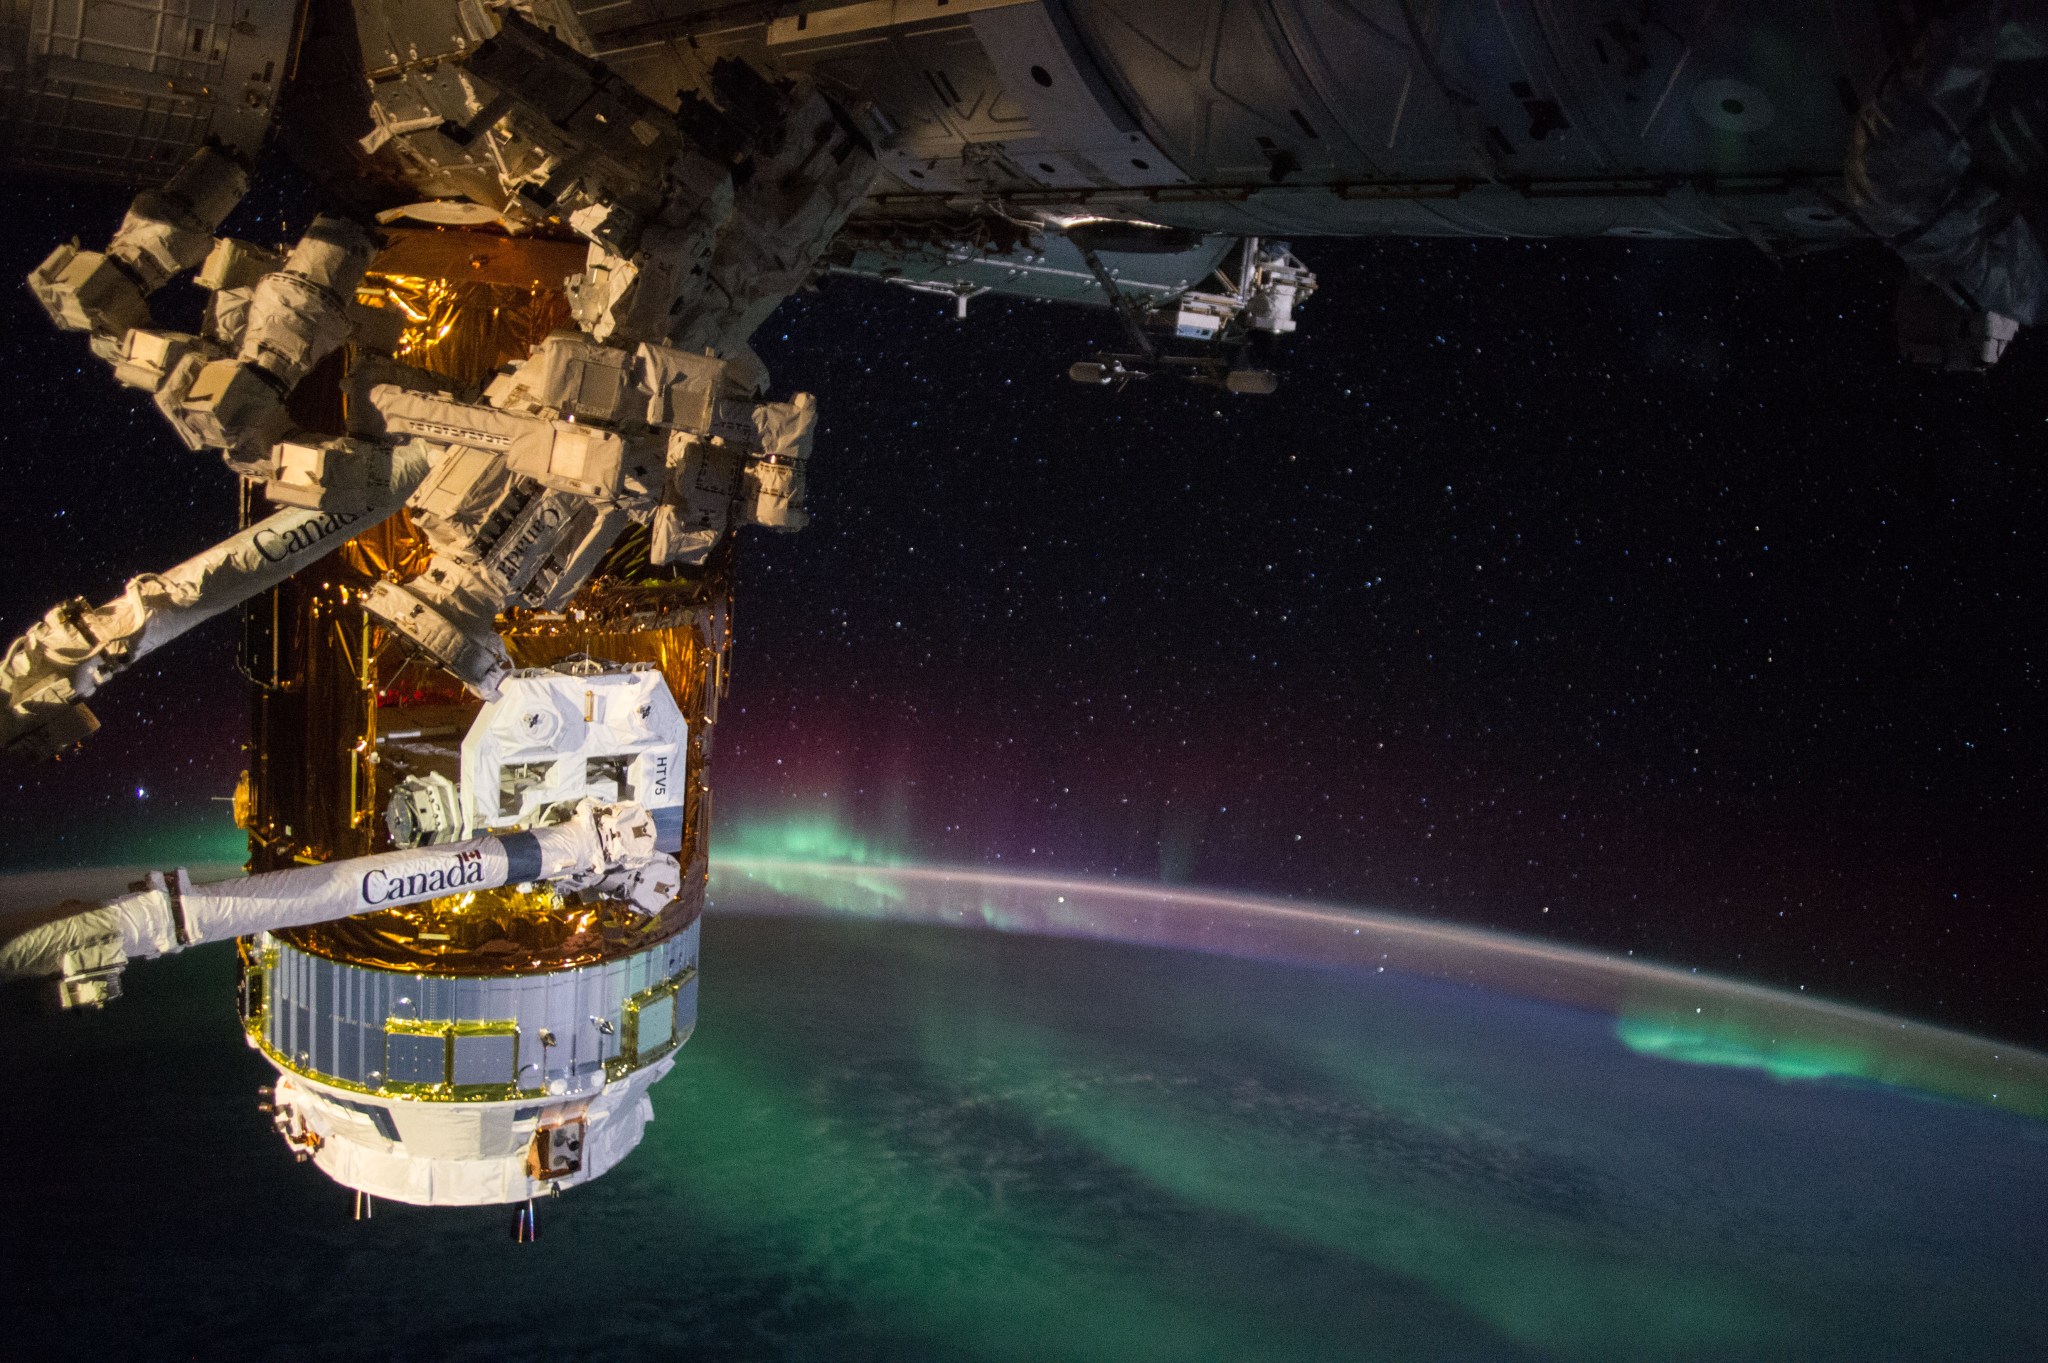 The Japan Aerospace Exploration Agency (JAXA) Kounotori 5 H-II Transfer Vehicle (HTV-5) is seen berthed to the International Space Station. The external CALET experiment, which will search for signatures of dark matter, is seen being extracted from the unpressurized section by the station's robotic arm, Canadarm2. The unpiloted cargo craft, named "Kounotori," which is Japanese for "white stork," is loaded with more than four-and-a-half tons of research and supplies, including water, spare parts and experiment hardware.